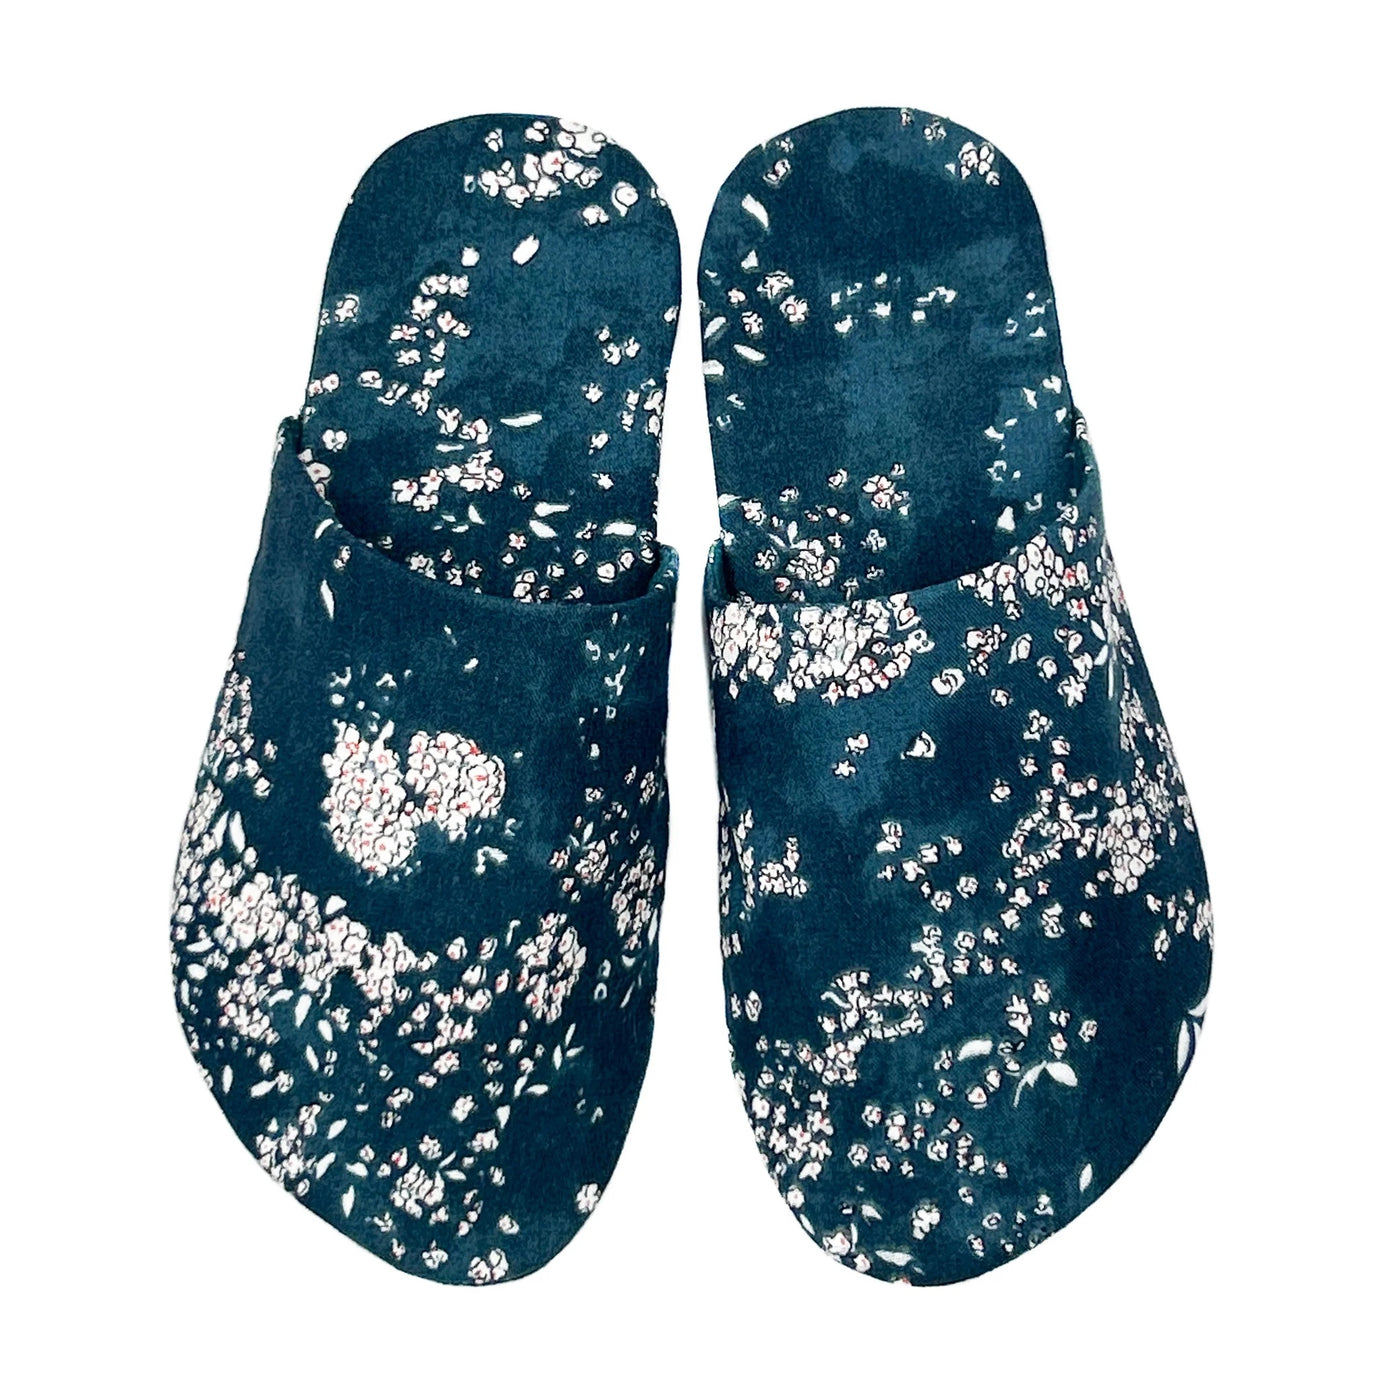 Photo of the Whisper Slippers sewing pattern from Dhurata Davies Patterns on The Fold Line. A bedroom slippers pattern made in cotton or linen fabric, featuring a closed toe and open back, perfect for using up fabric scraps.